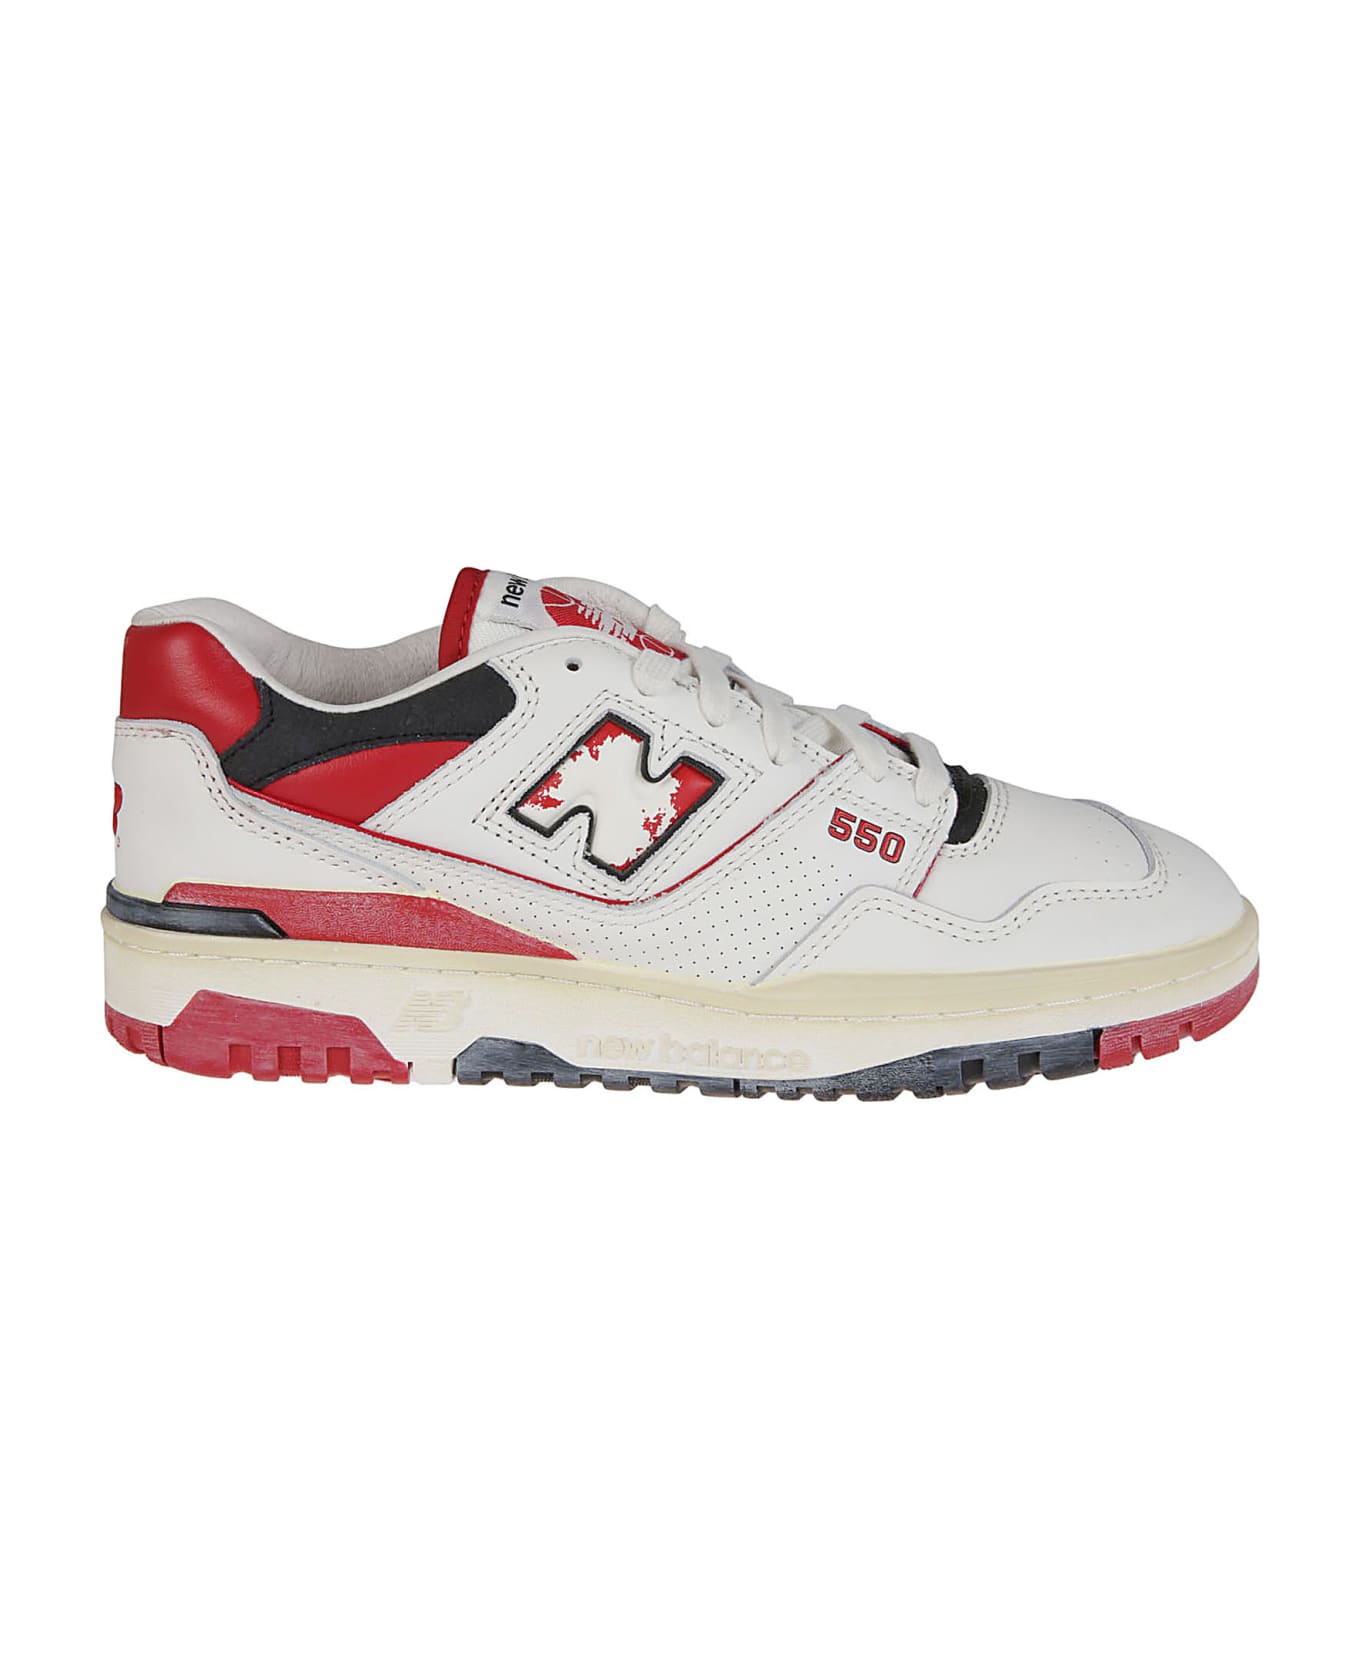 New Balance 550 Sneakers - Off White/red